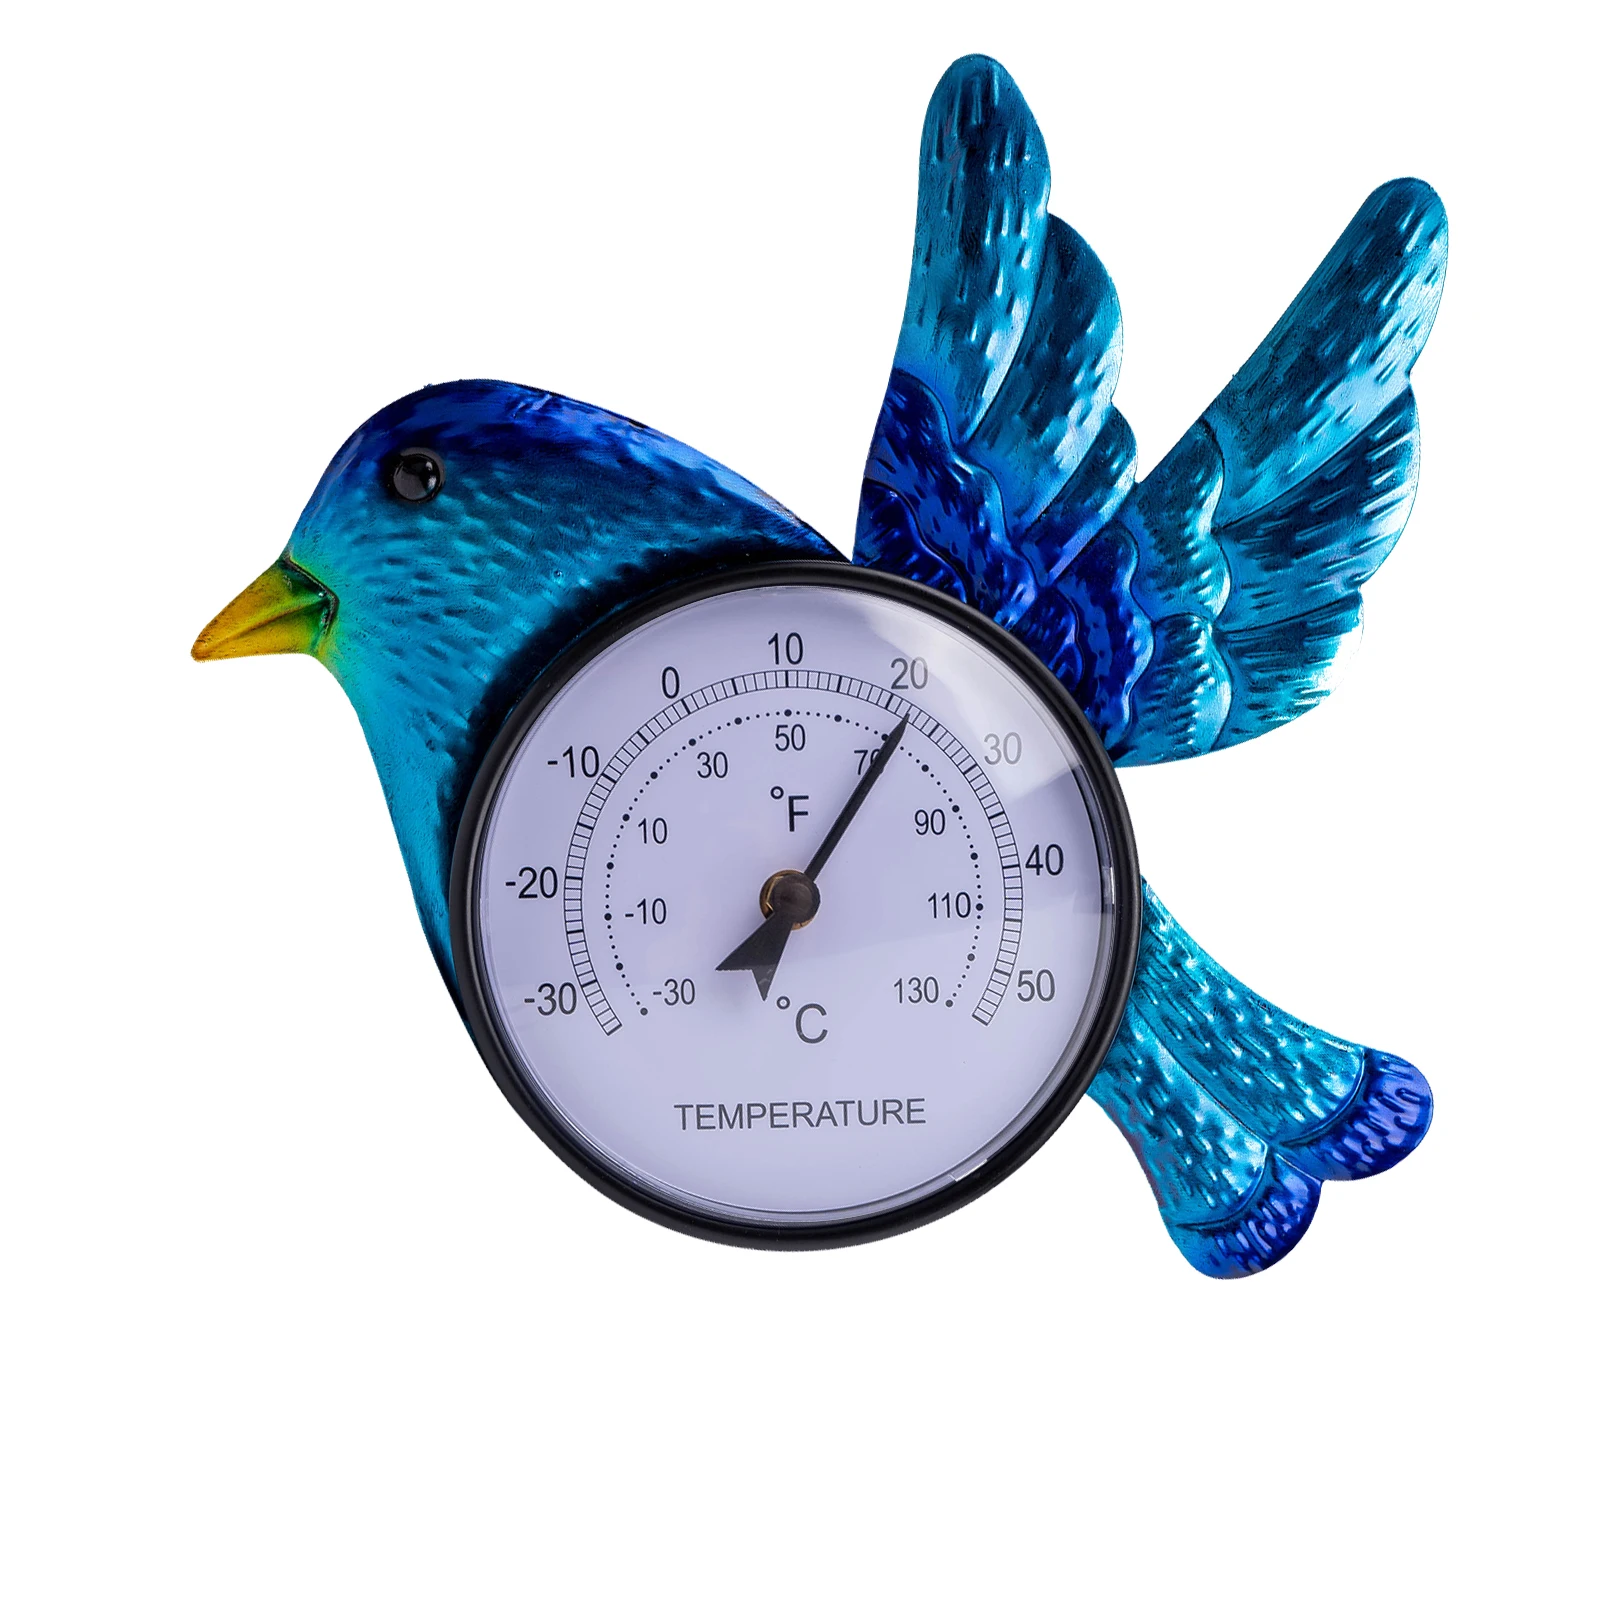 Thermometer Indoor Outdoor Blue Bird Decor Wall Mounted Thermometer for Patio, Garden Yard & Living Room, No Battery Needed